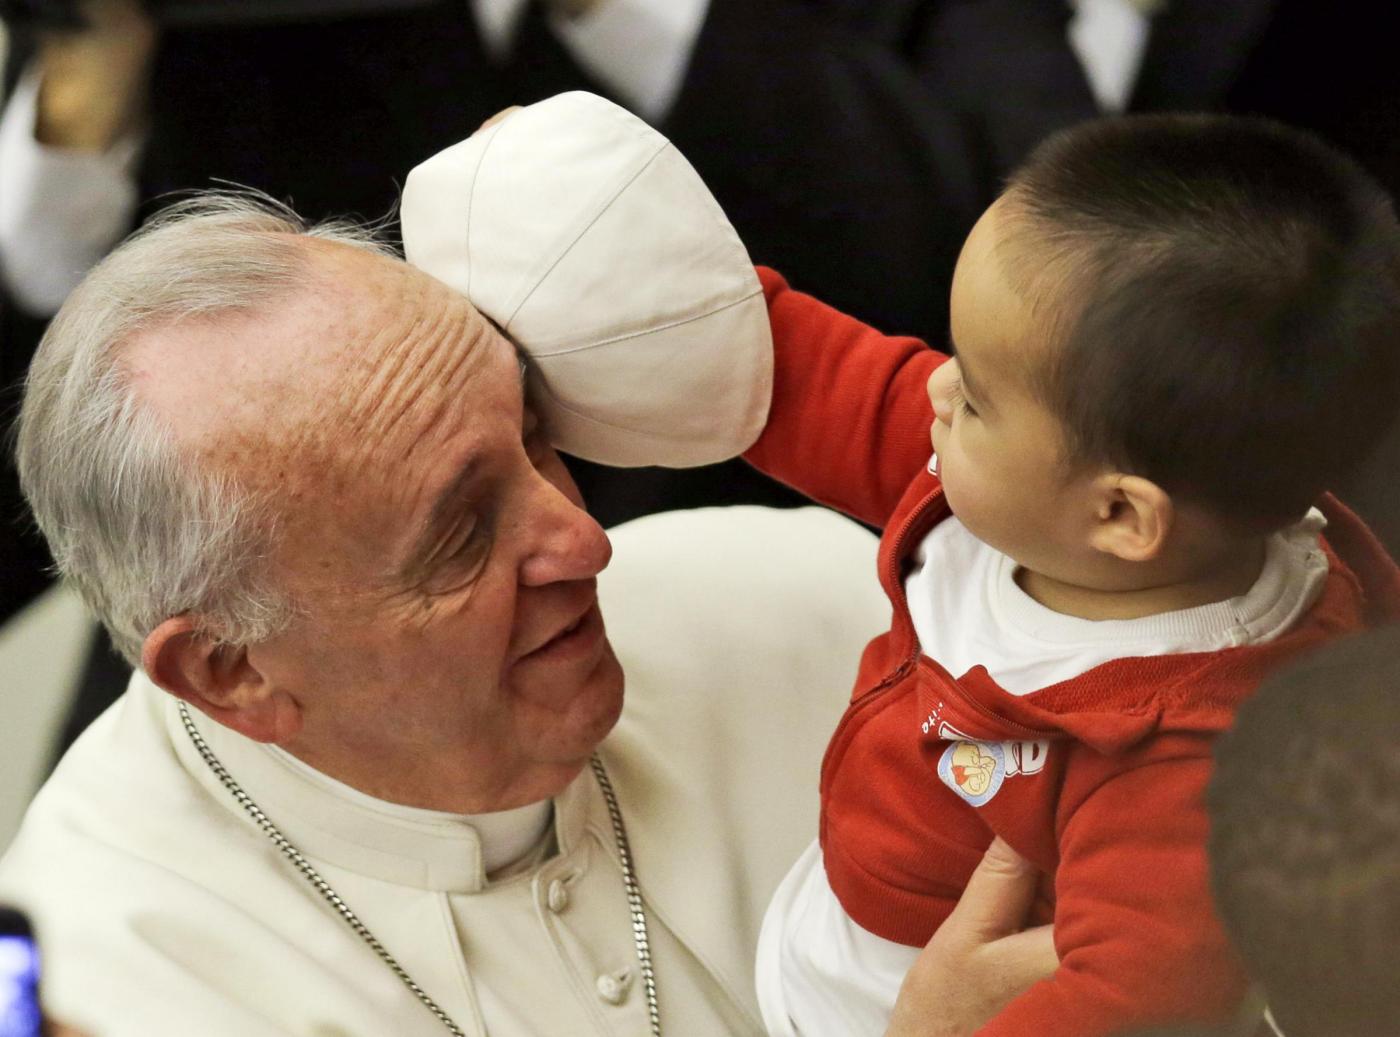 A child takes off Pope Francis' white zucchetto, or skullcap, during a meeting with children and volunteers of the Santa Marta Vatican Institute, at the Vatican, Saturday, Dec. 14, 2013. (AP Photo/Gregorio Borgia)